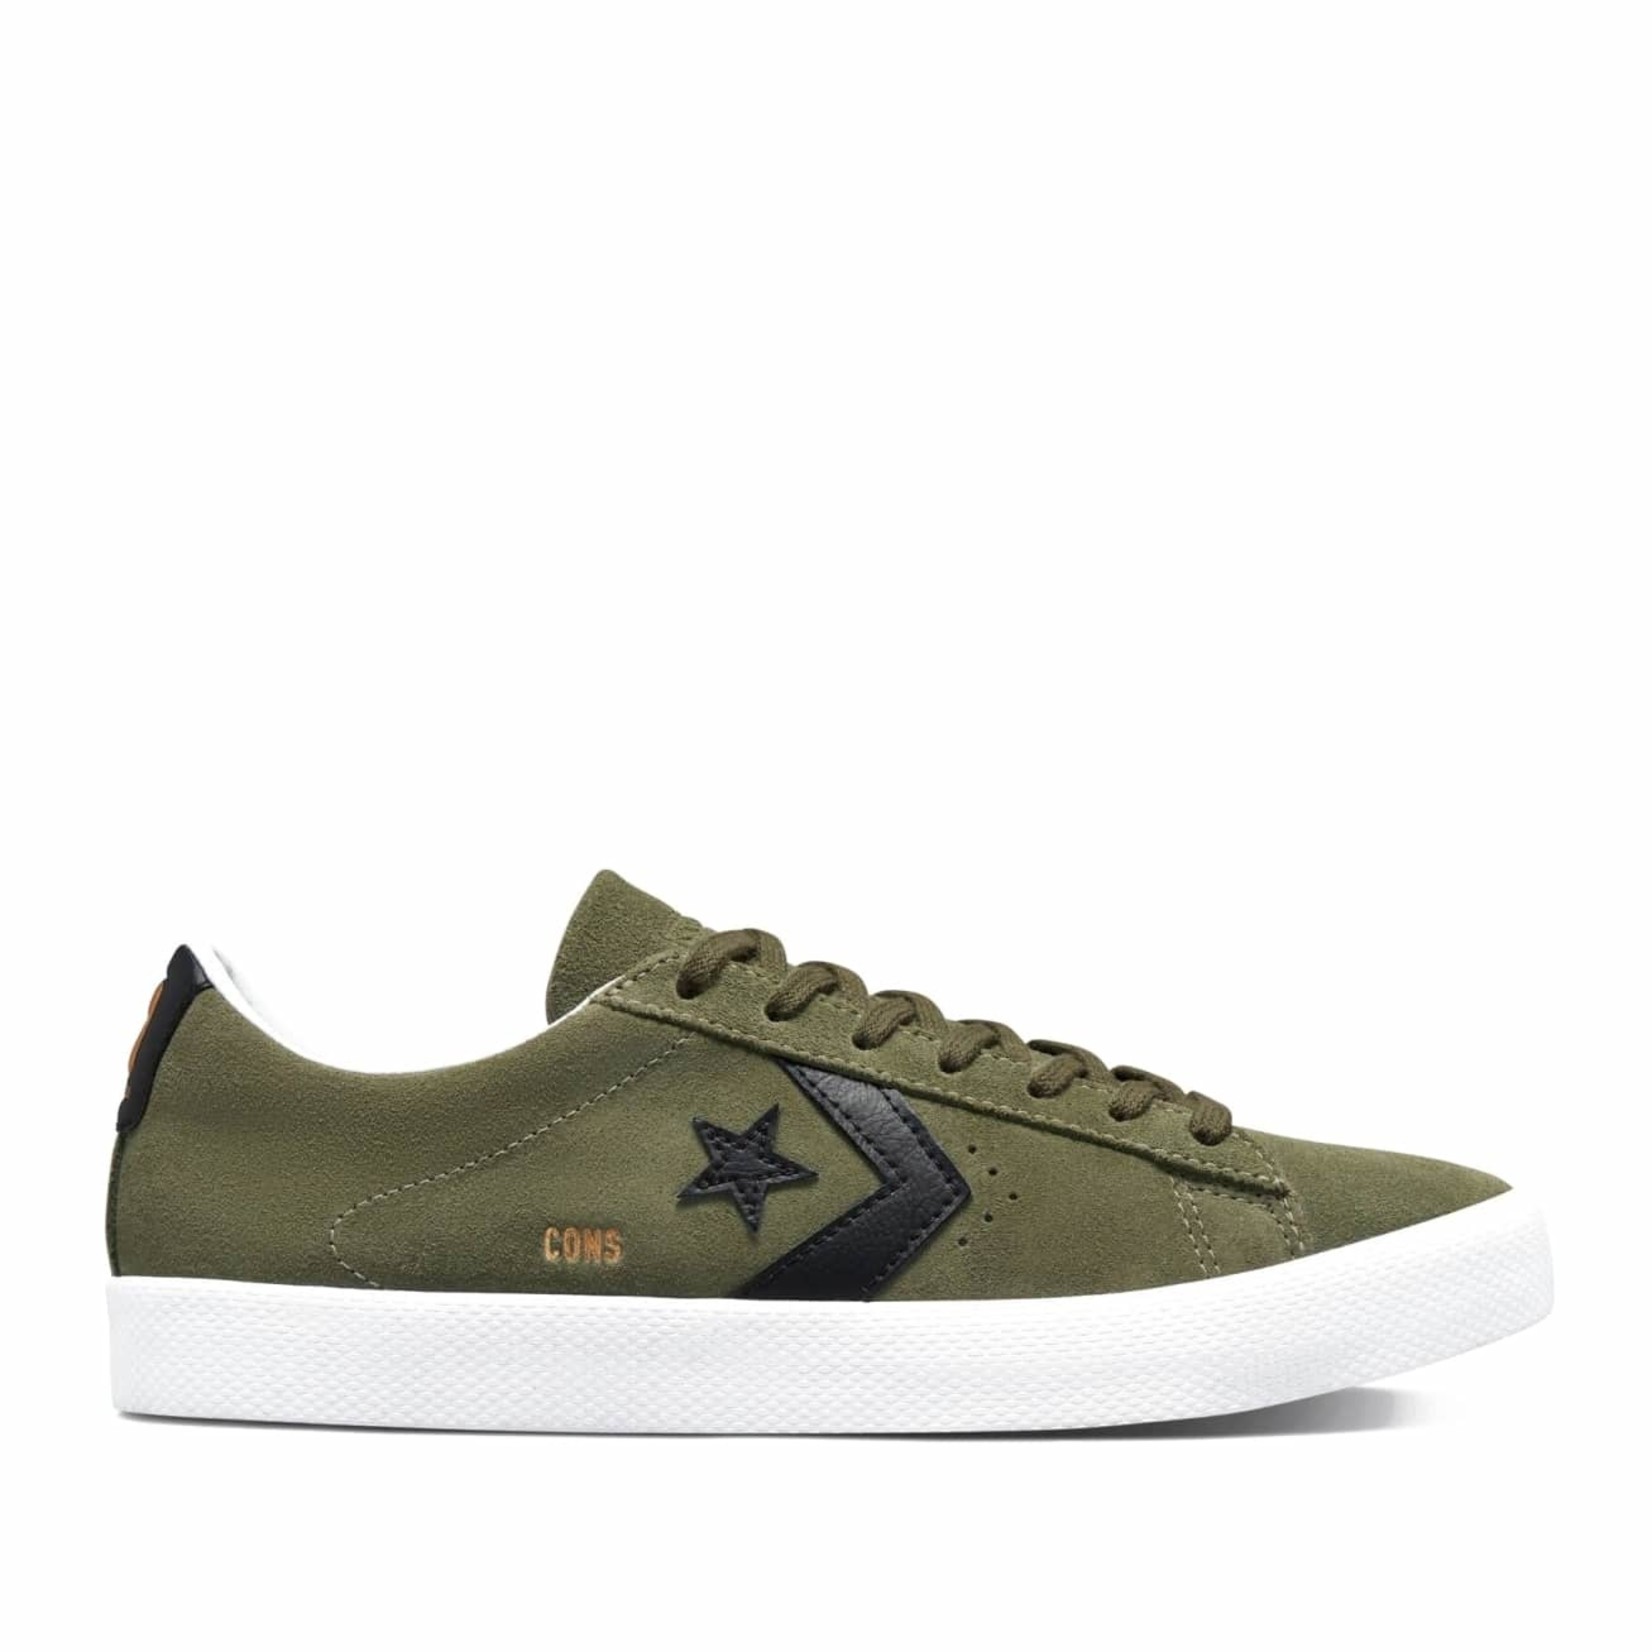 Converse Cons Converse CONS Pro Leather Pro OX (Utility Green/Black/White)